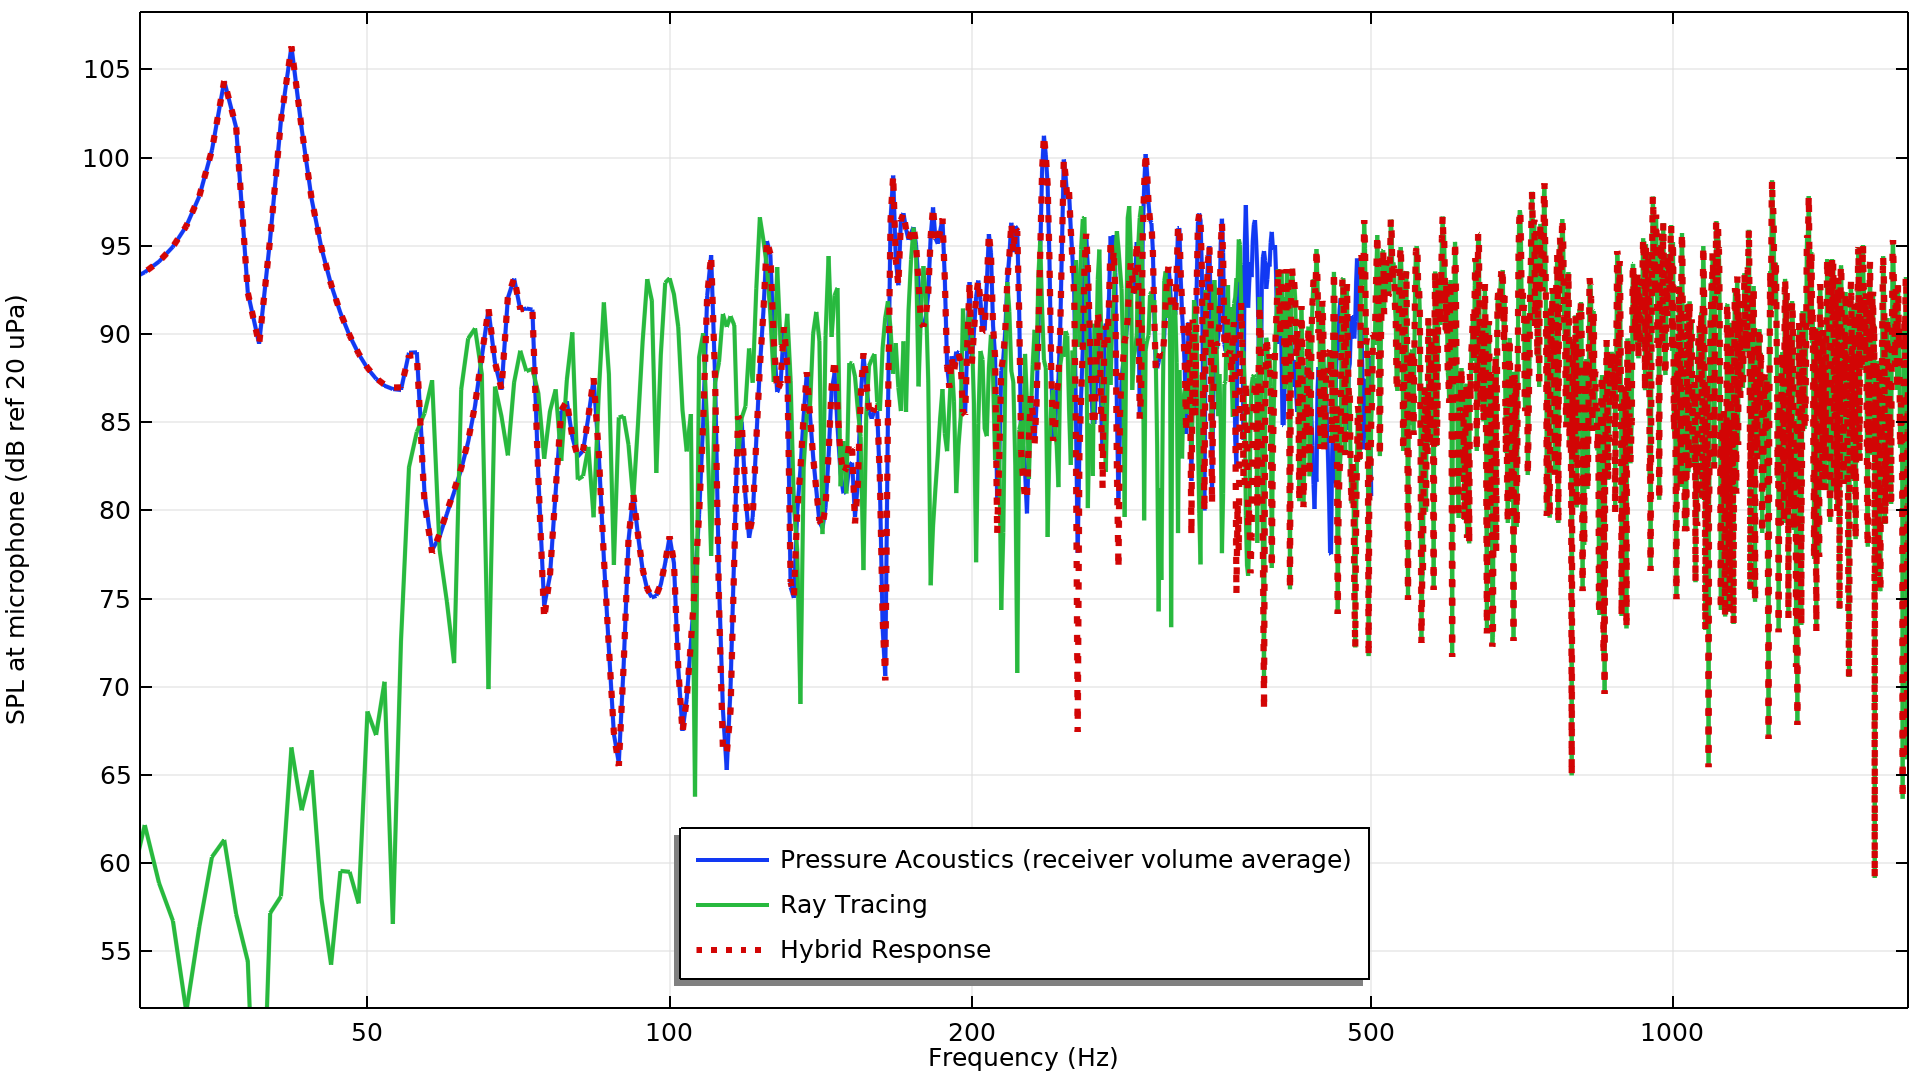 A 1D plot with Frequency (Hz) on the x-axis and SPL at microphone (dB ref 20 uPa) on the y-axis. A key shows a blue line, green line, and dashed red line representing pressure acoustics (receiver volume average), ray tracing, and hybrid response, respectively.